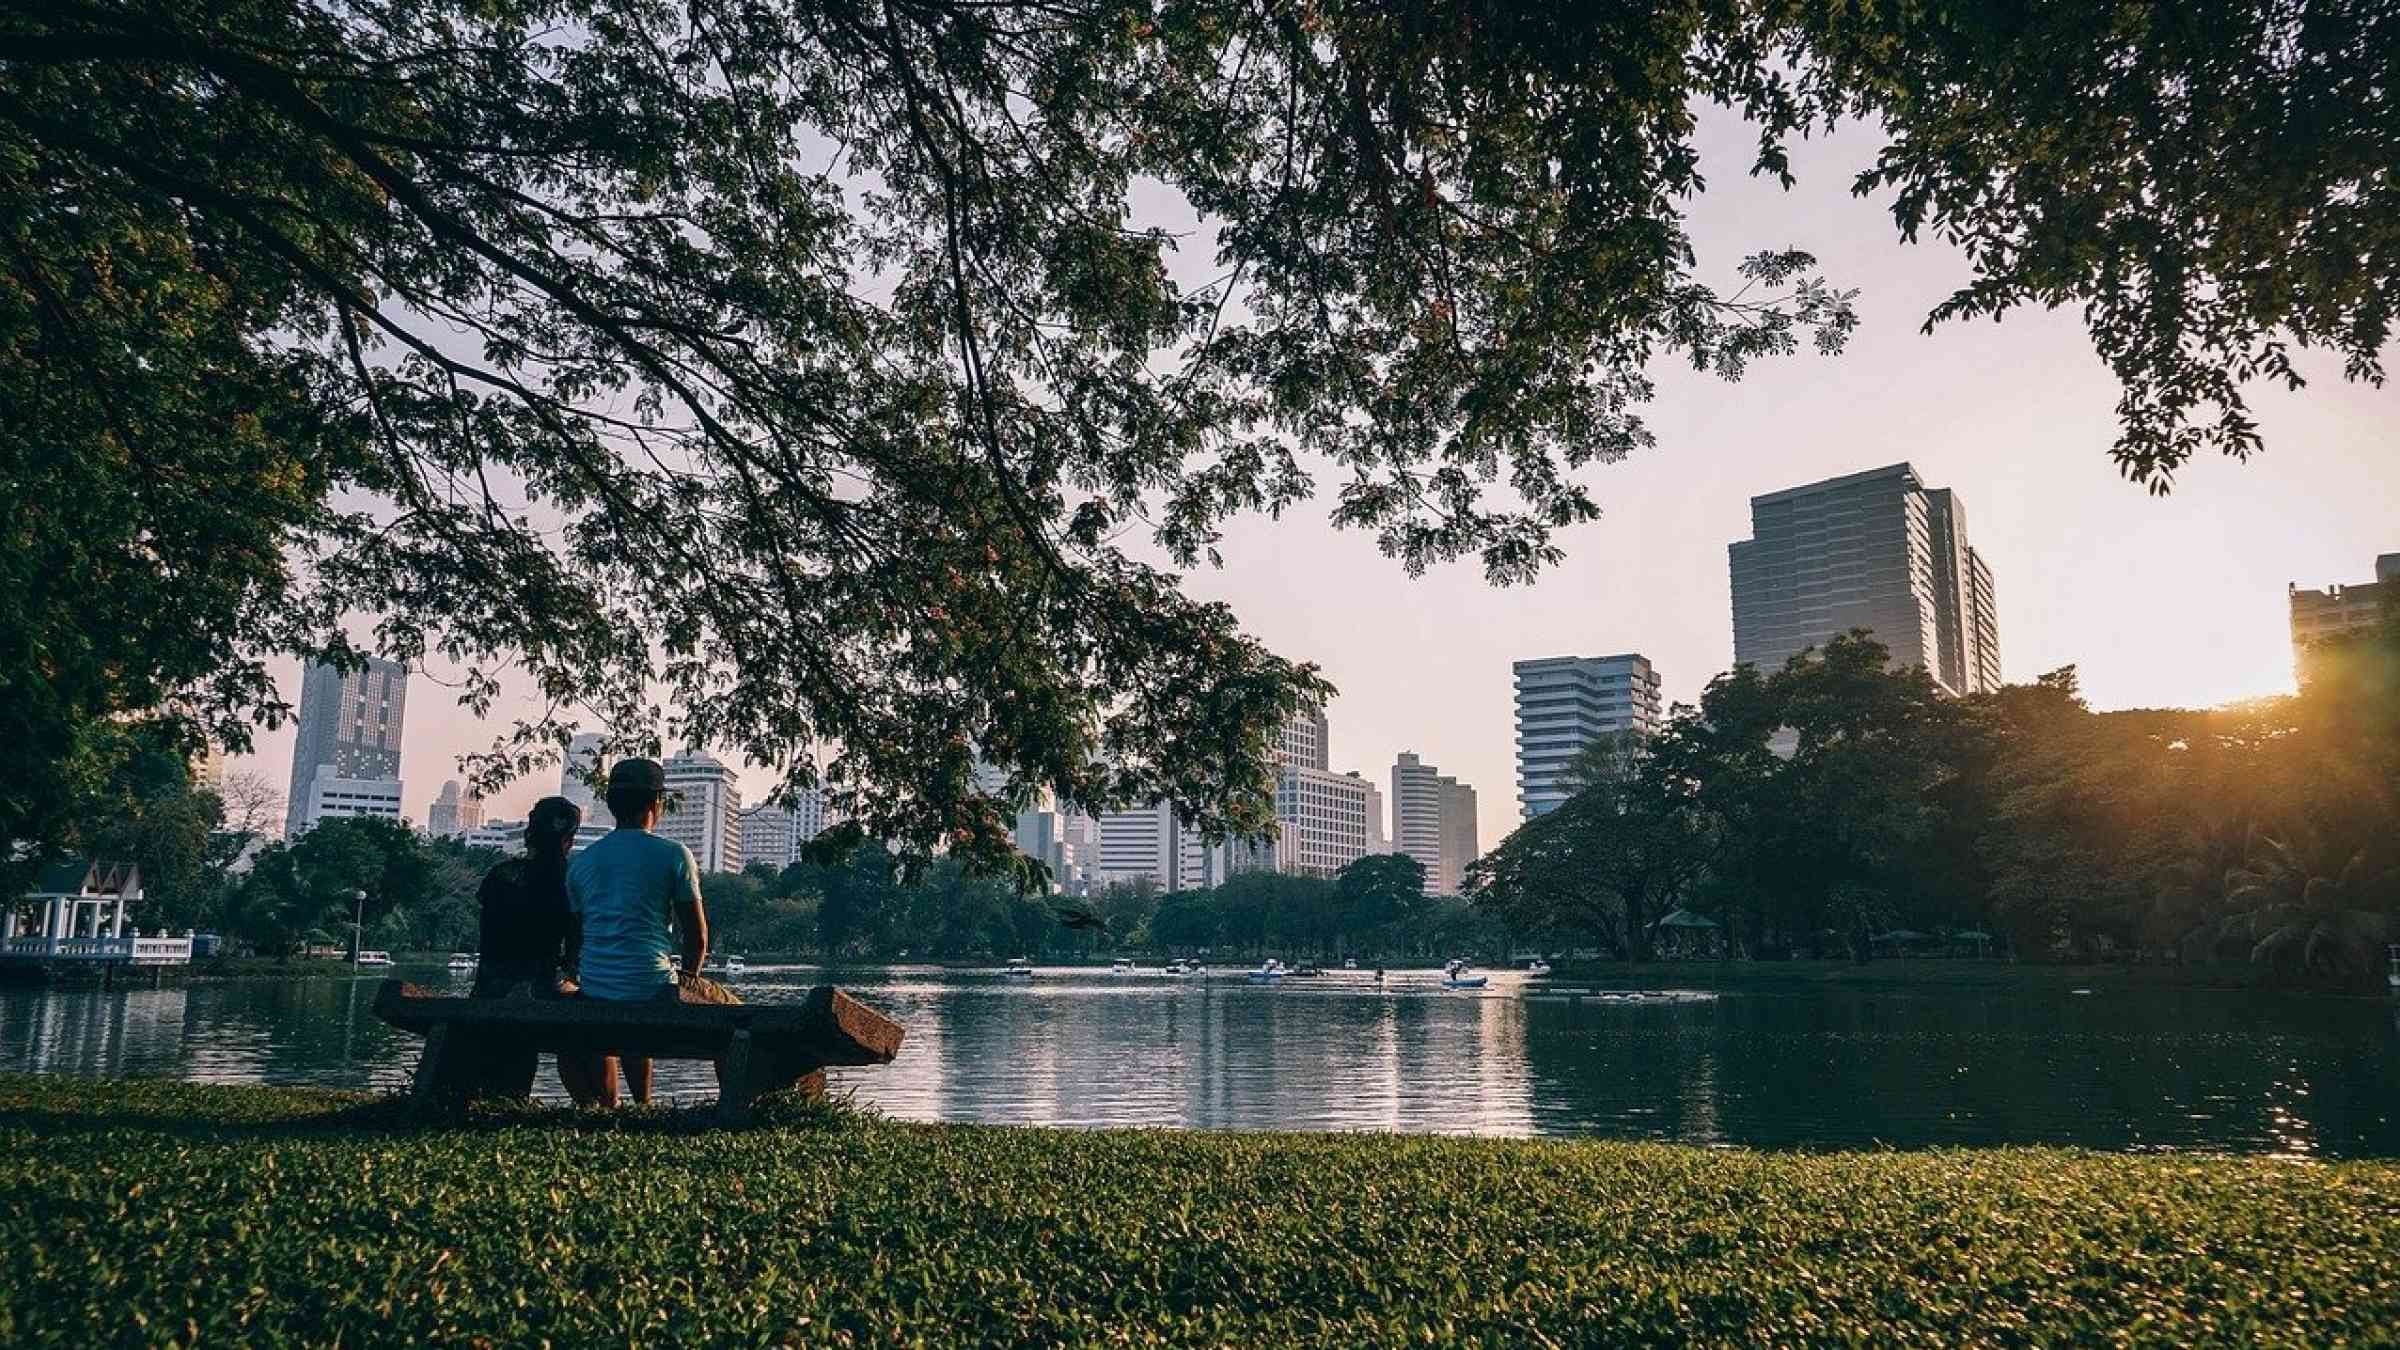 Two people sitting on a bench by a river in Bangkok, Thailand